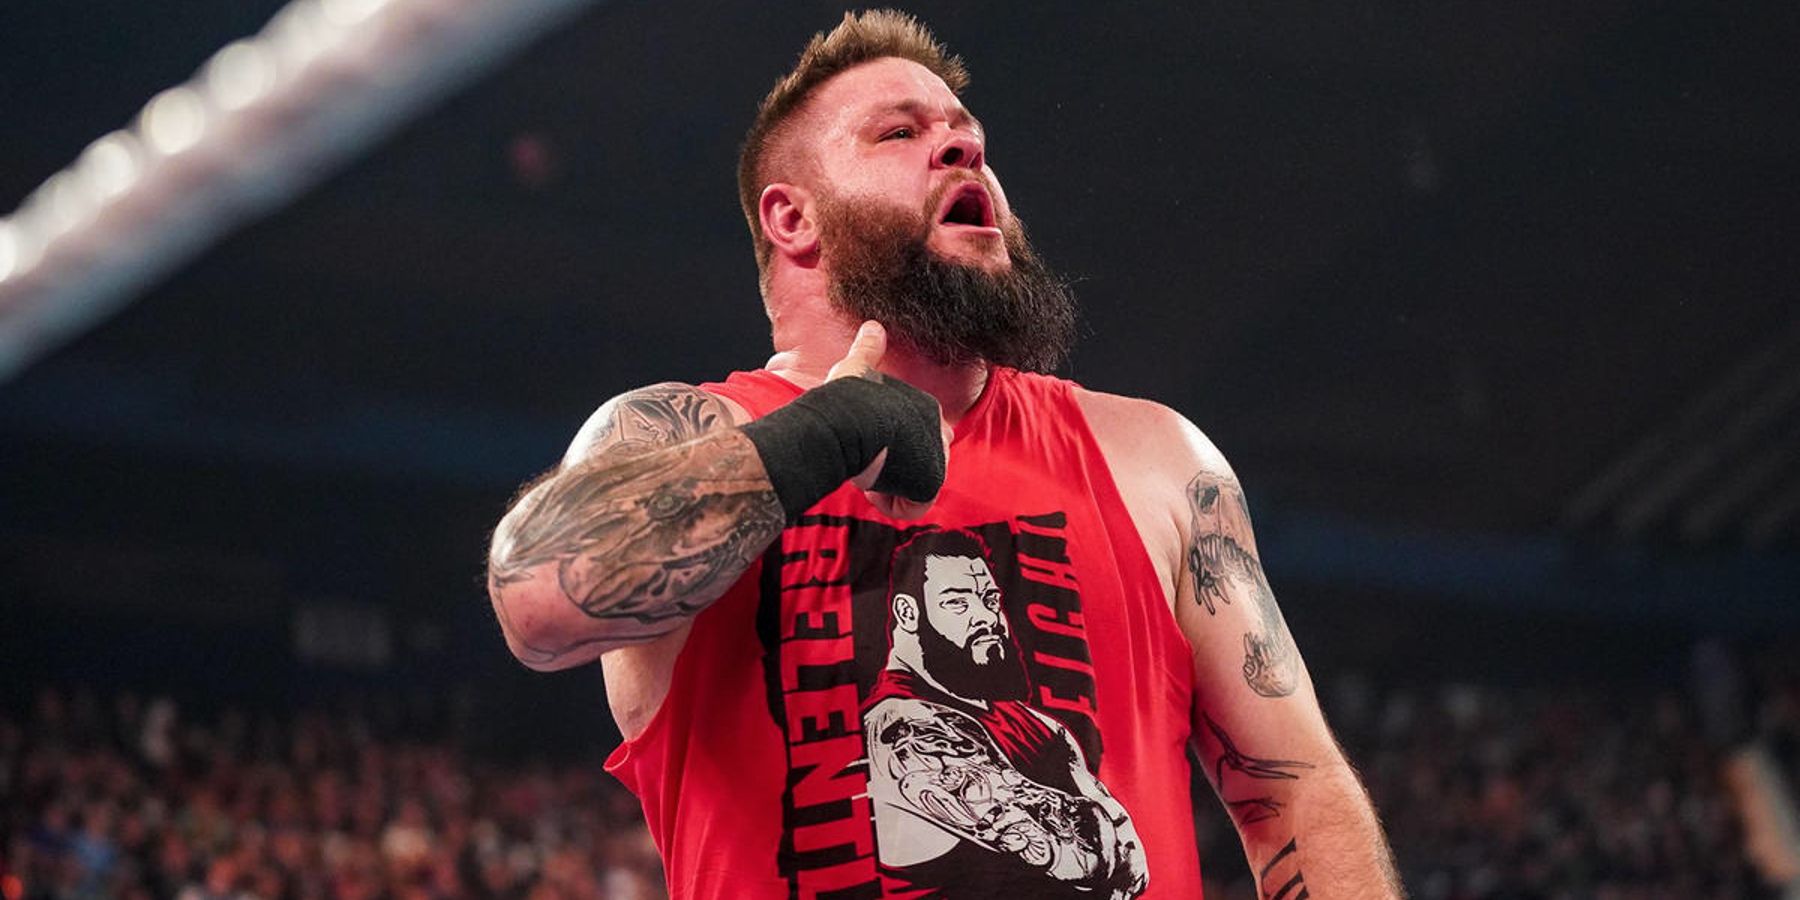 Kevin Owens celebrates a victory over Elias' young brother, Ezekiel, on WWE Monday Night Raw.